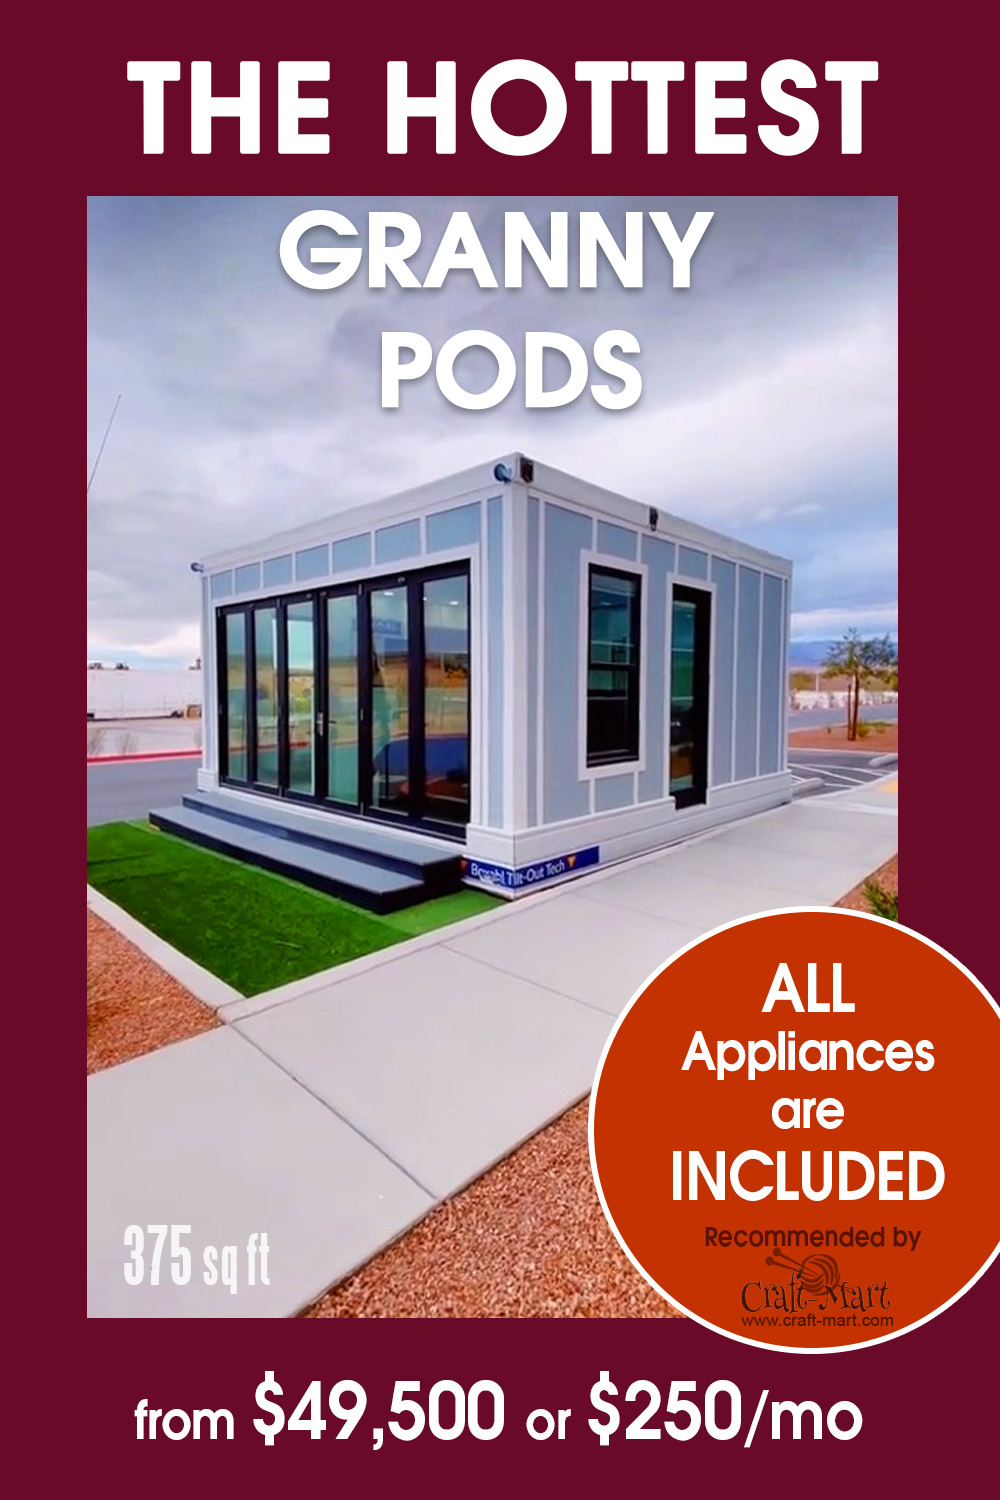 granny pods for sale and price lists